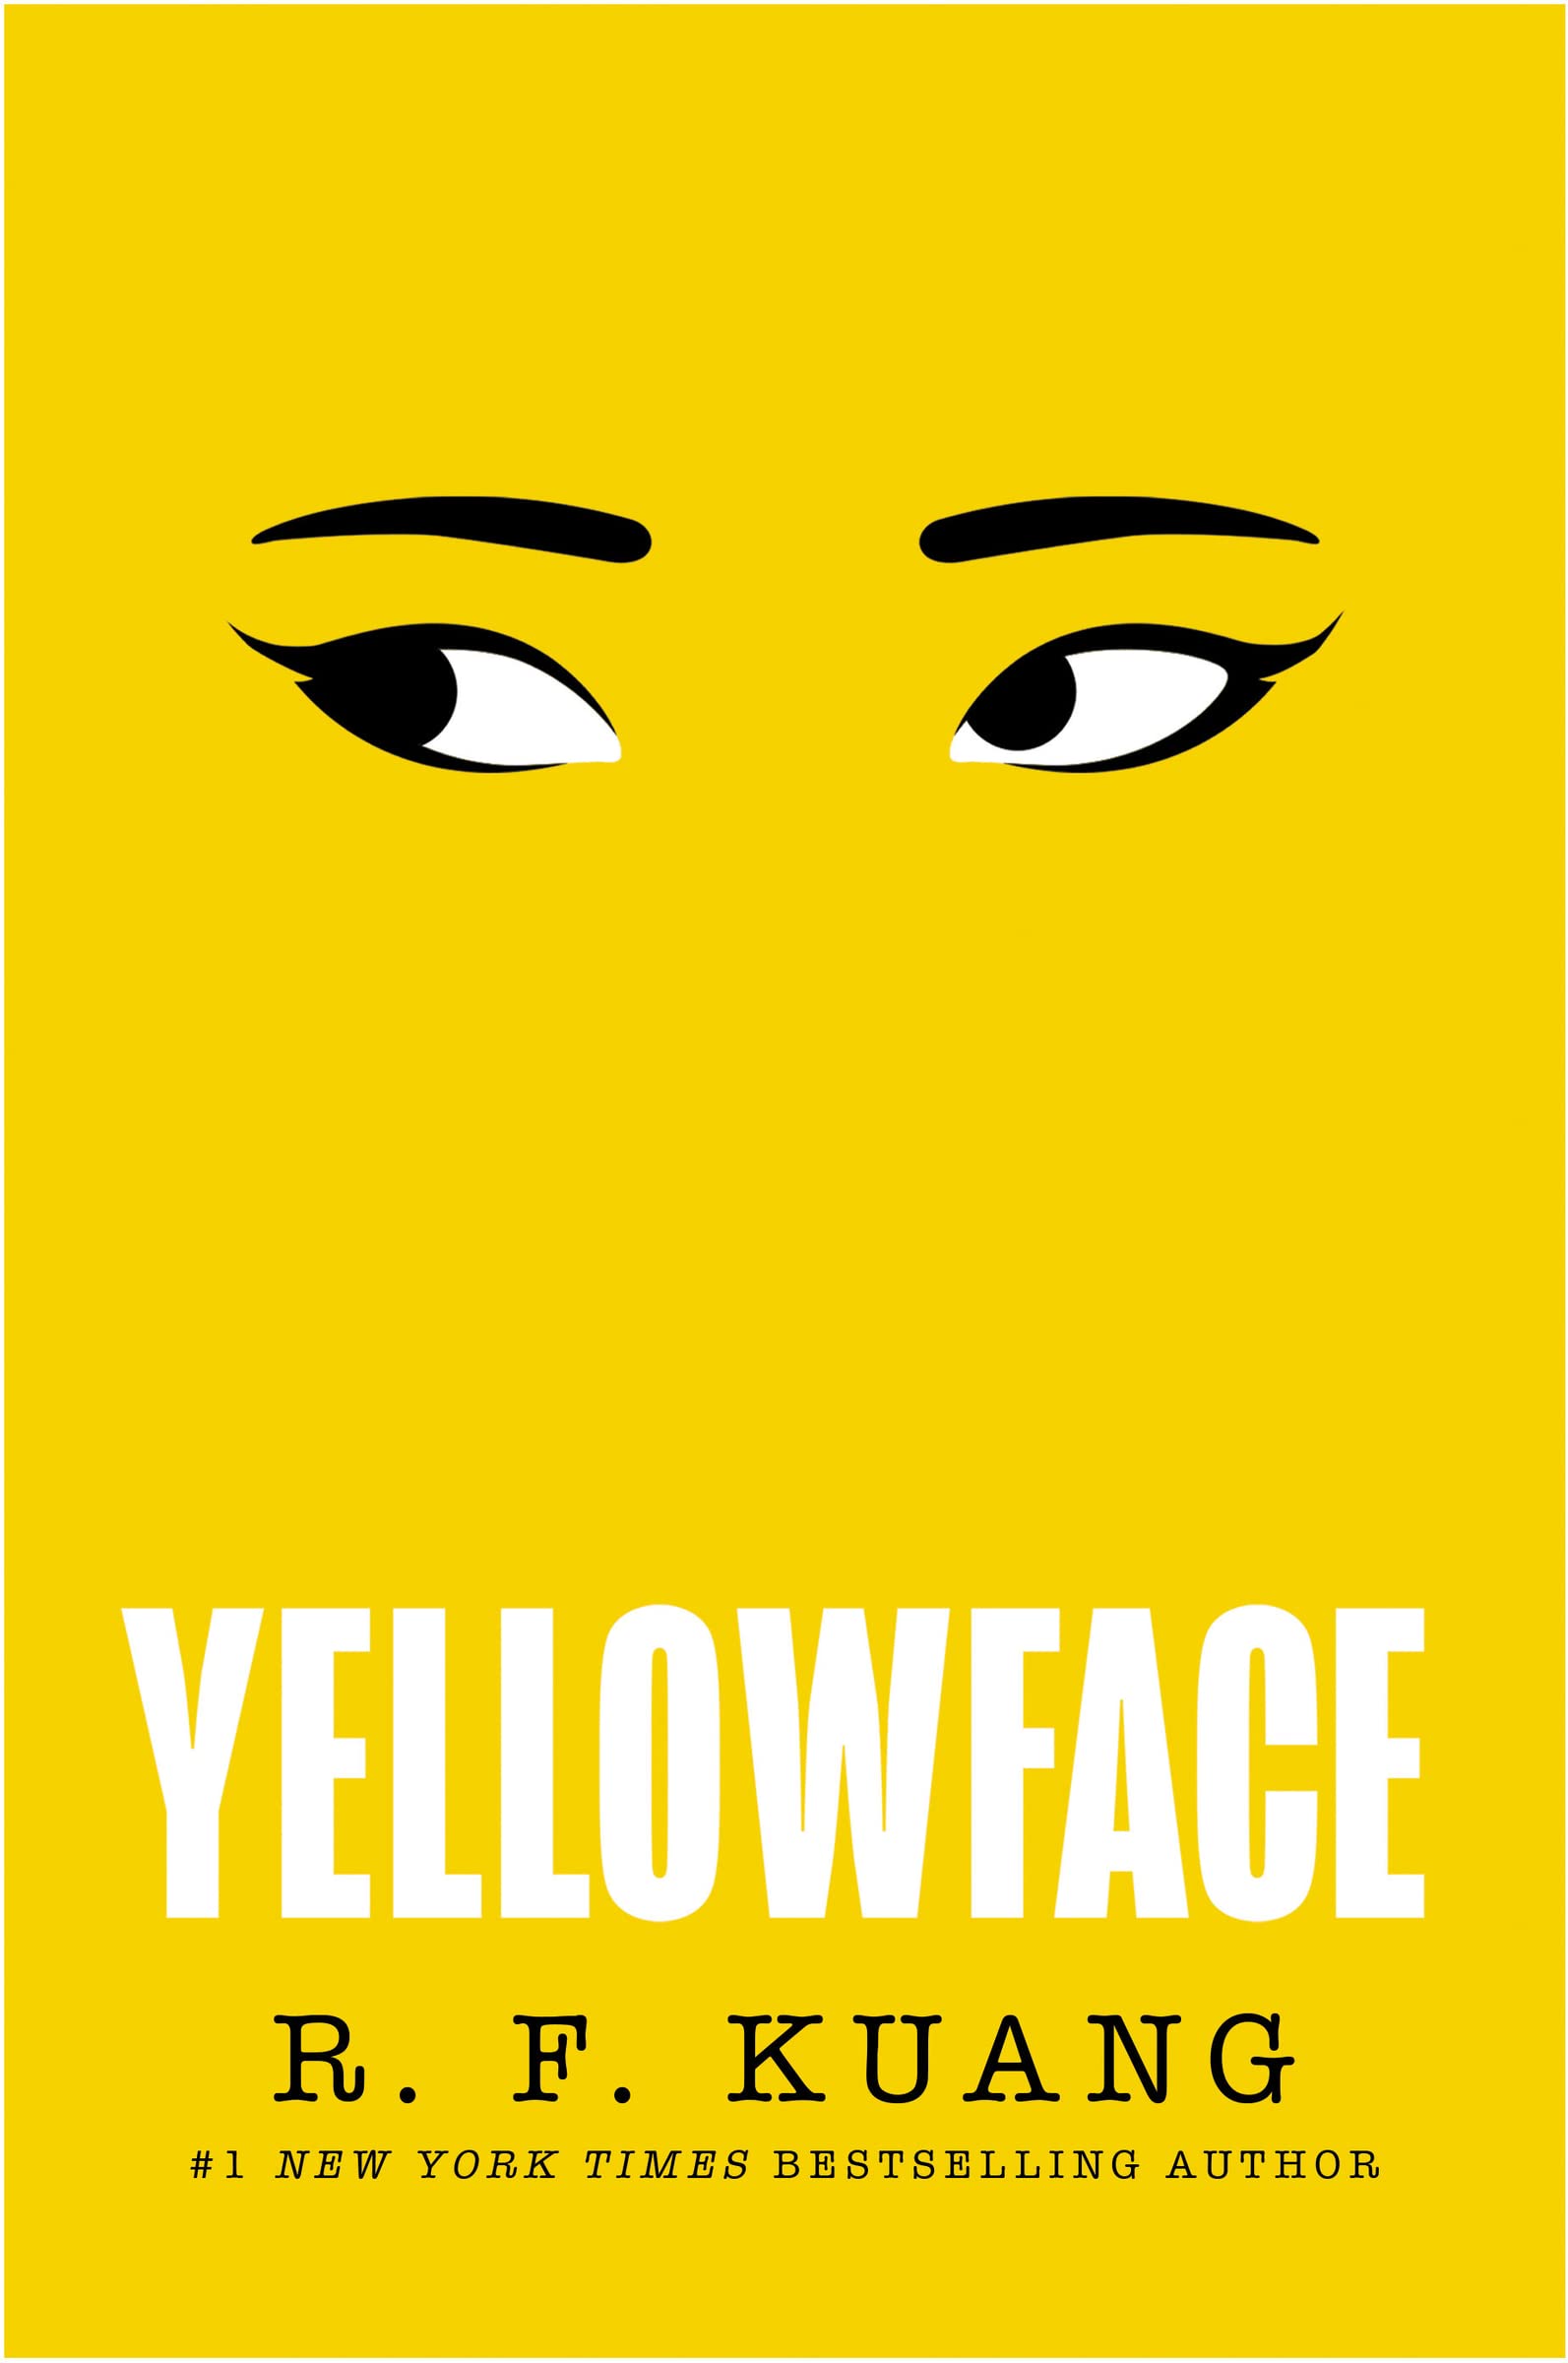 Cover for Yellowface by R.F. Kuang.